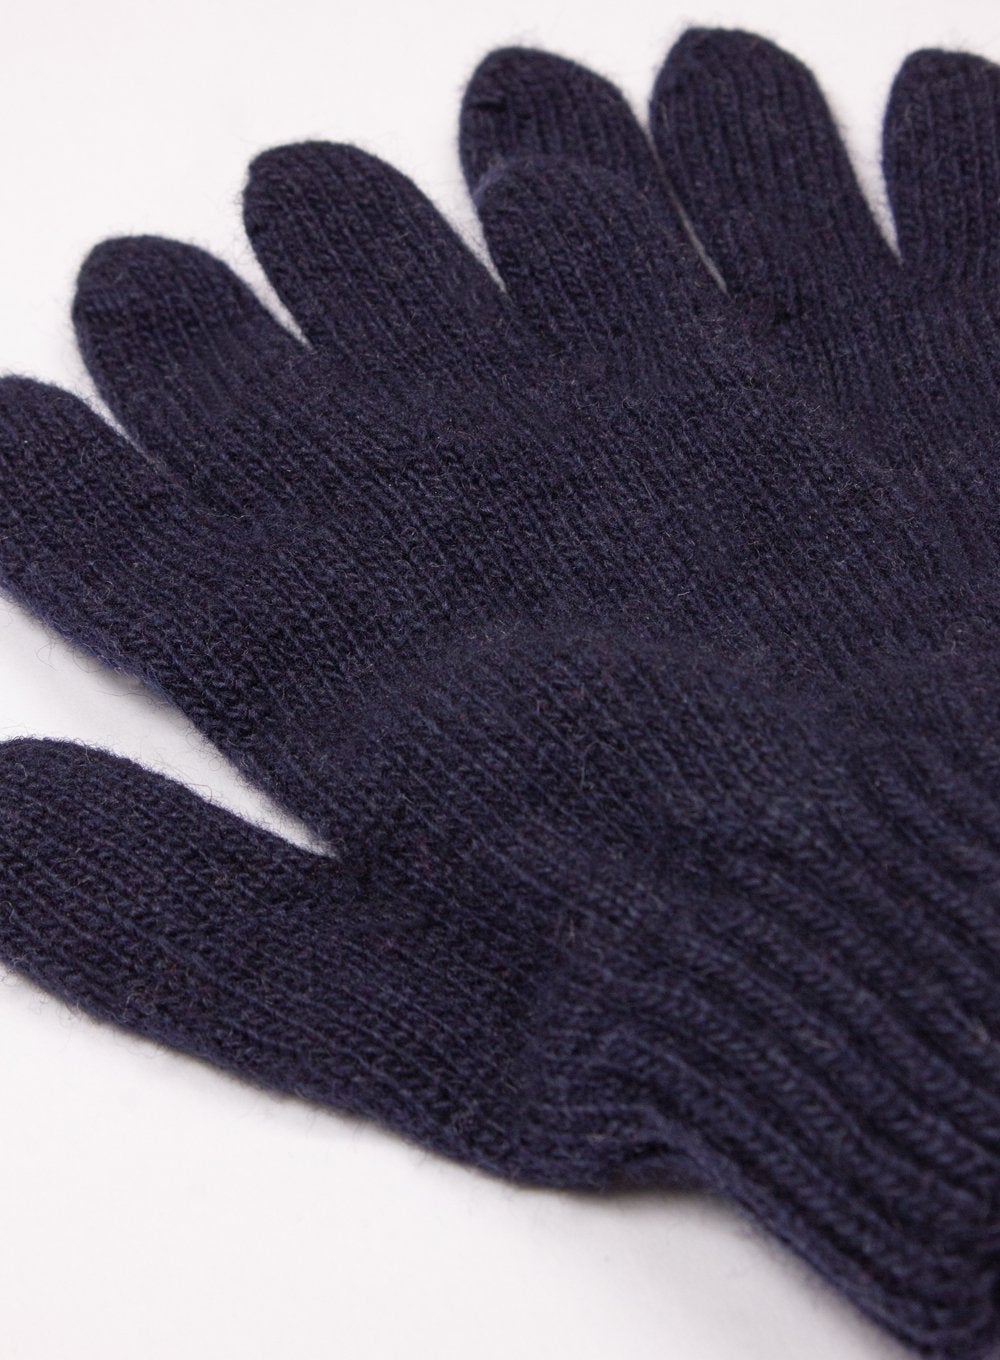 Chelsea Clothing Company Gloves Gloves in Navy - Trotters Childrenswear